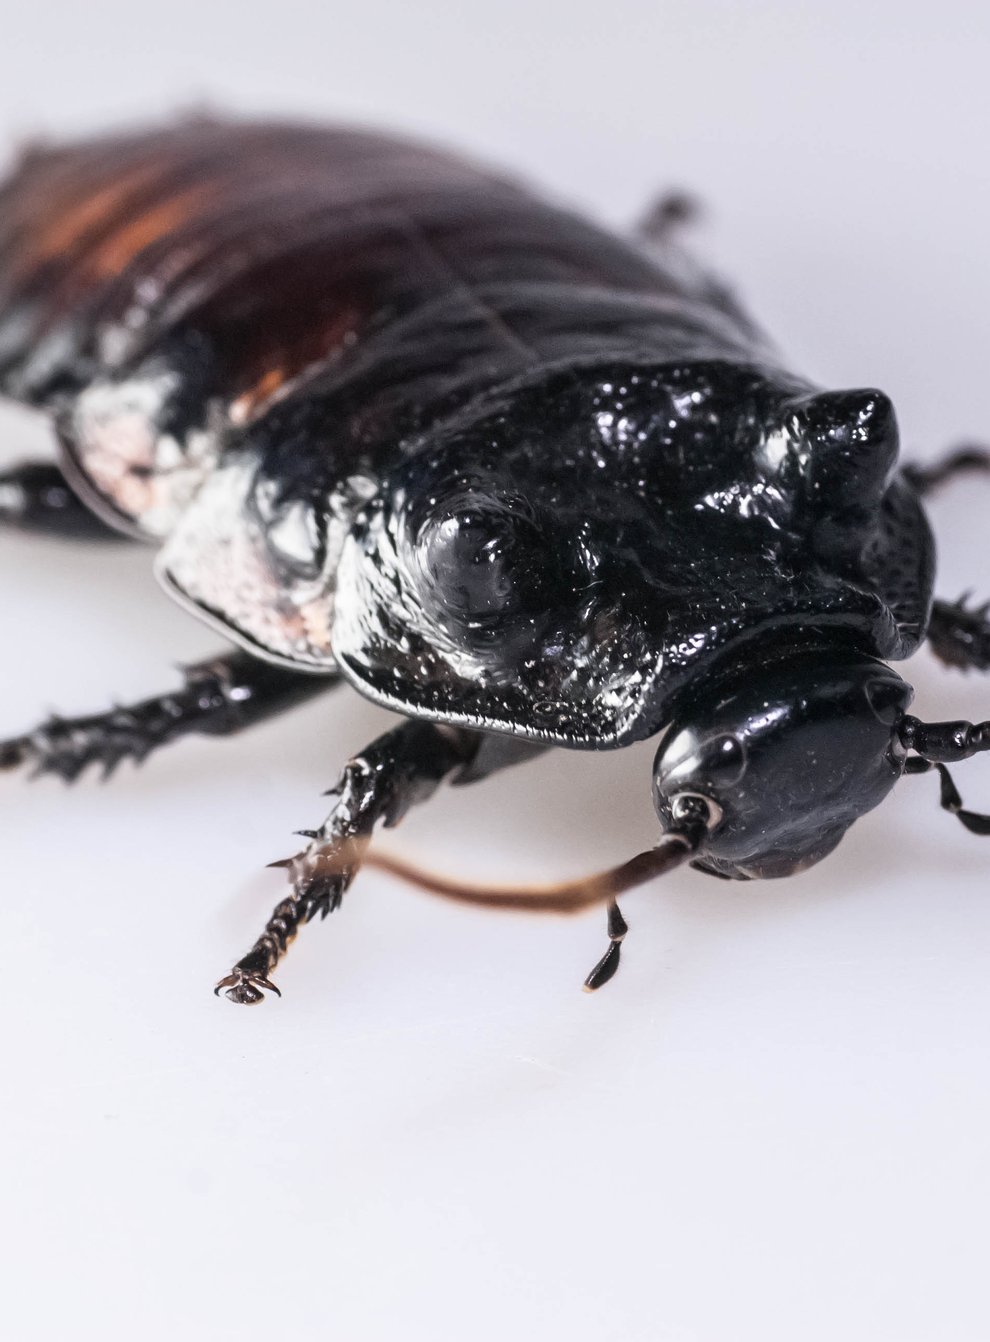 Male wide-horned hissing cockroach